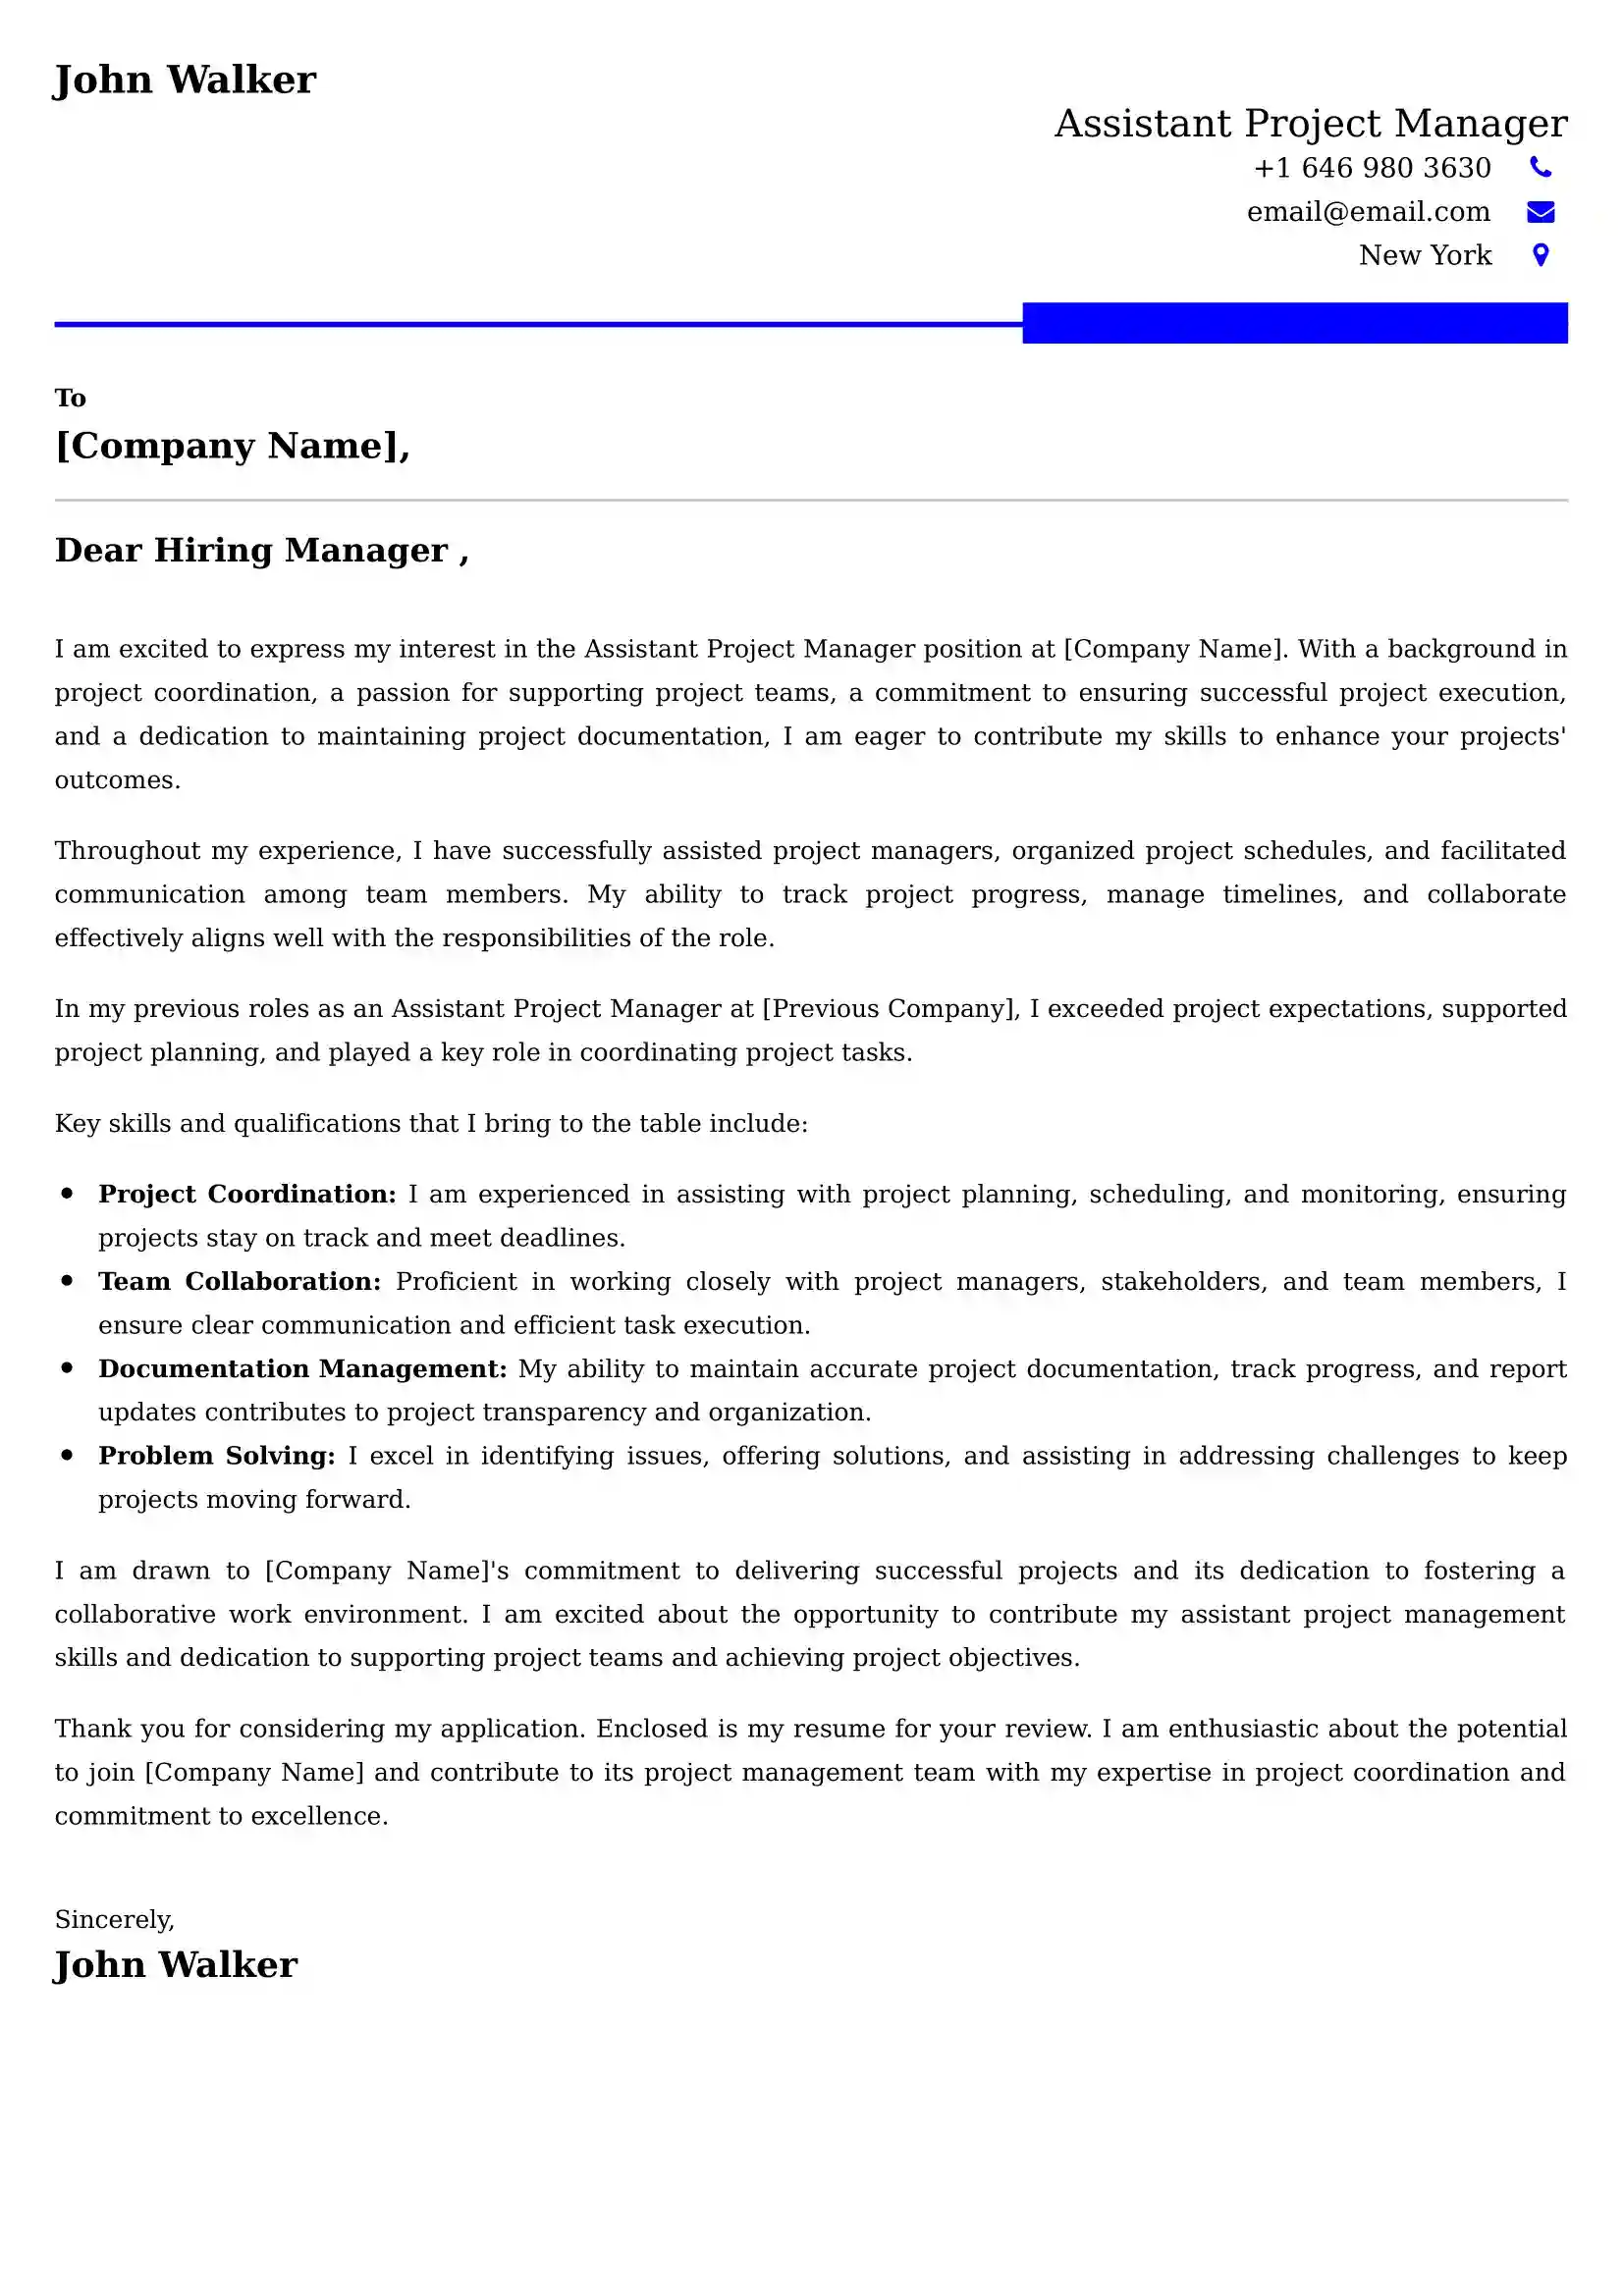 Assistant Project Manager Cover Letter Examples - Latest UK Format